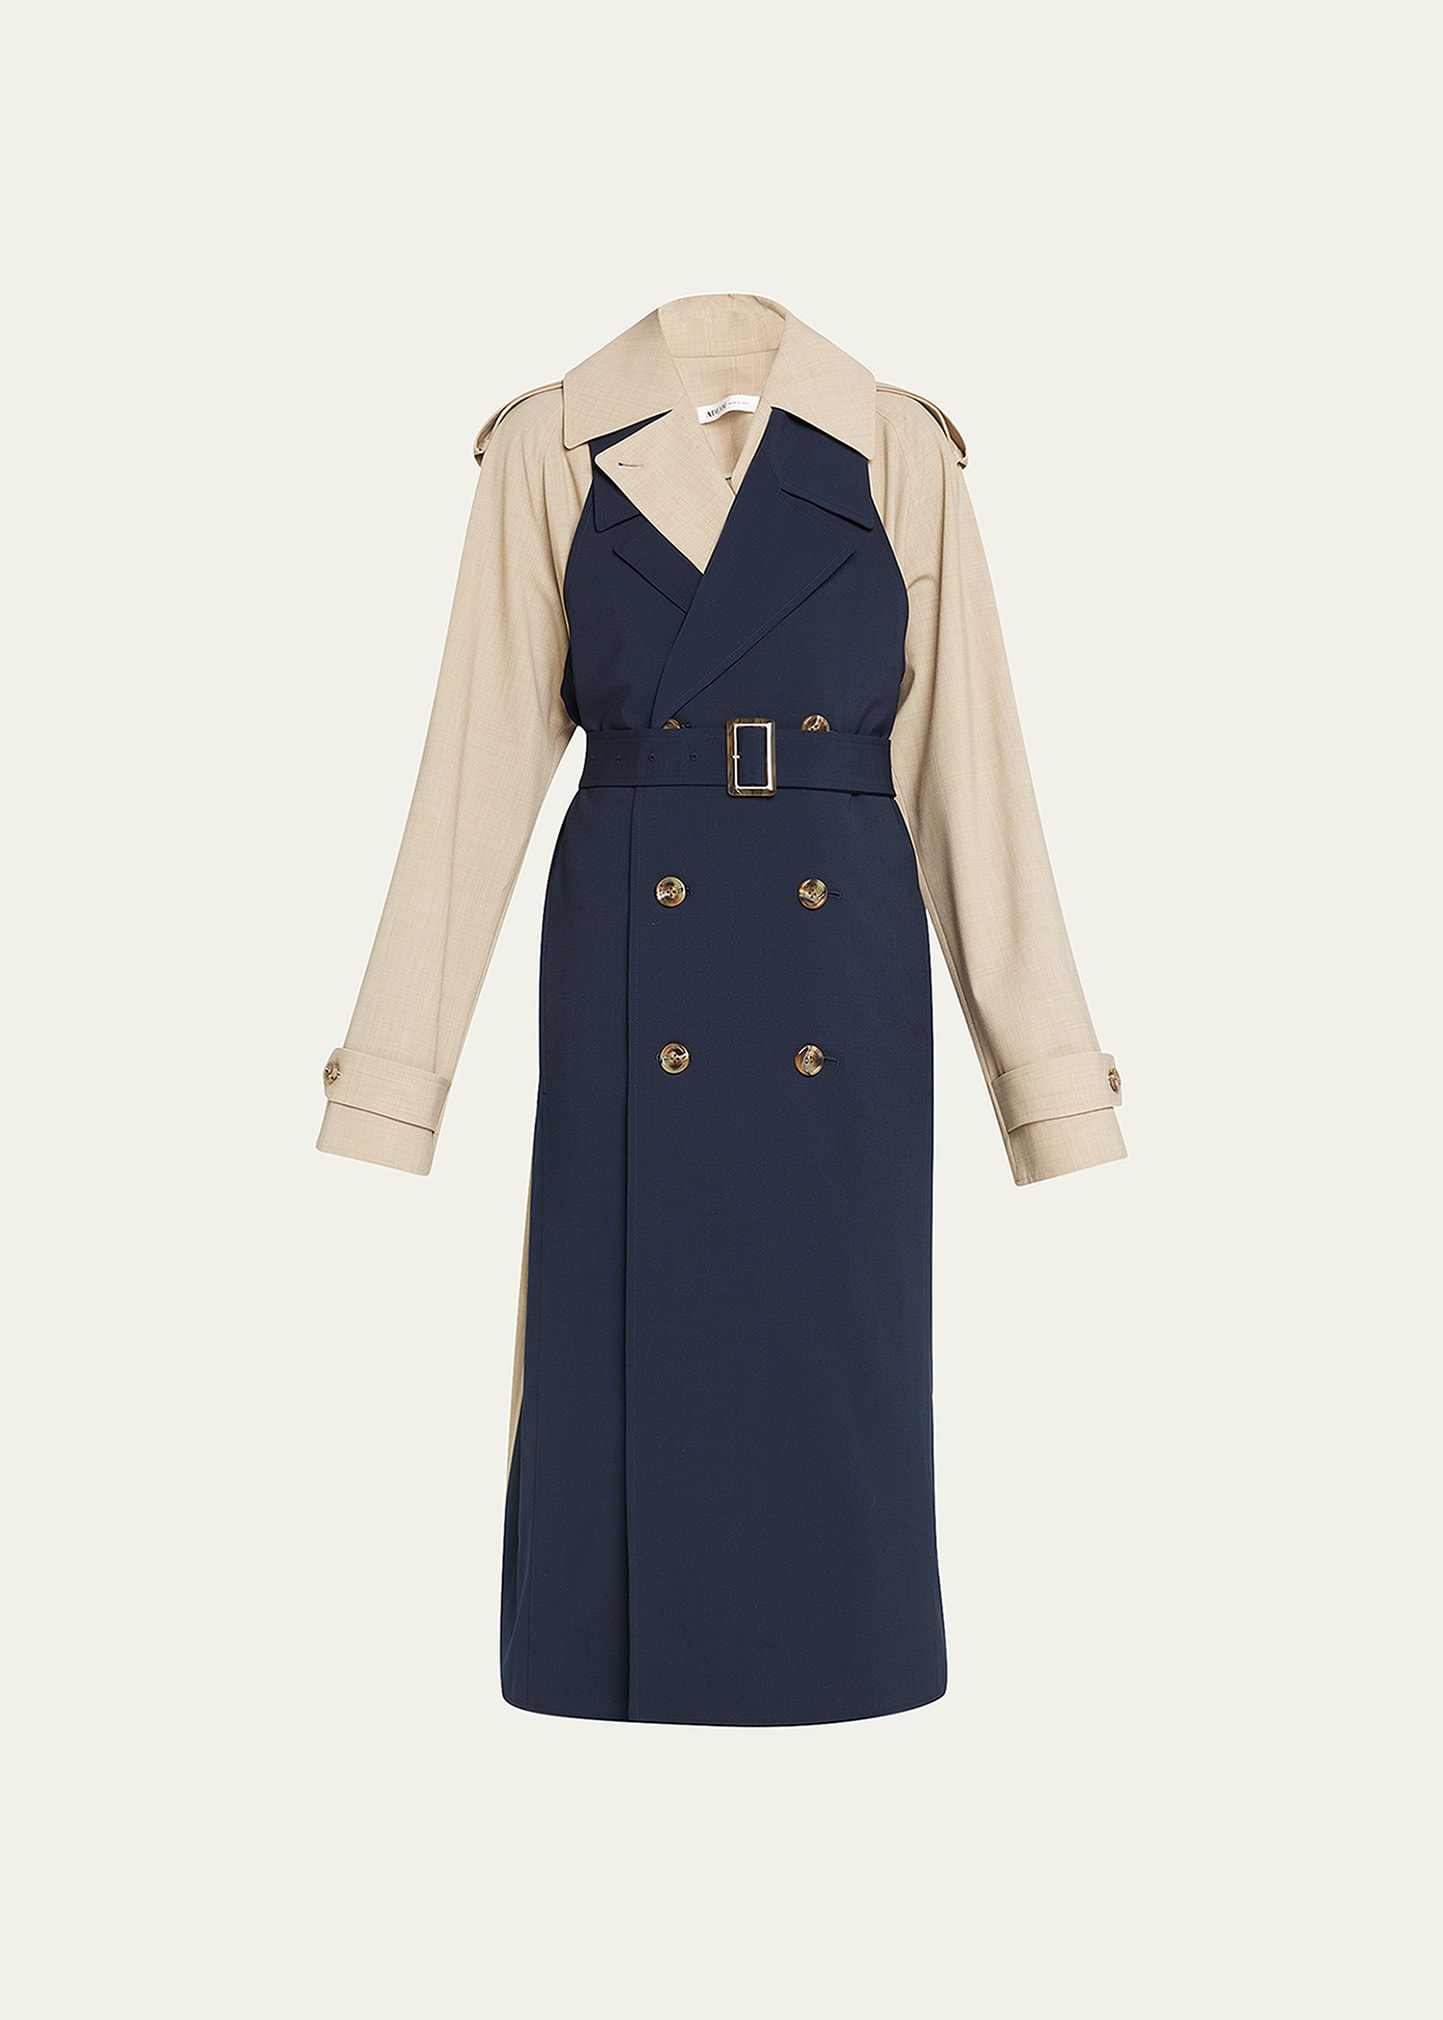 ADEAM Bricolage Double-Breasted Bicolor Belted Trench Coat